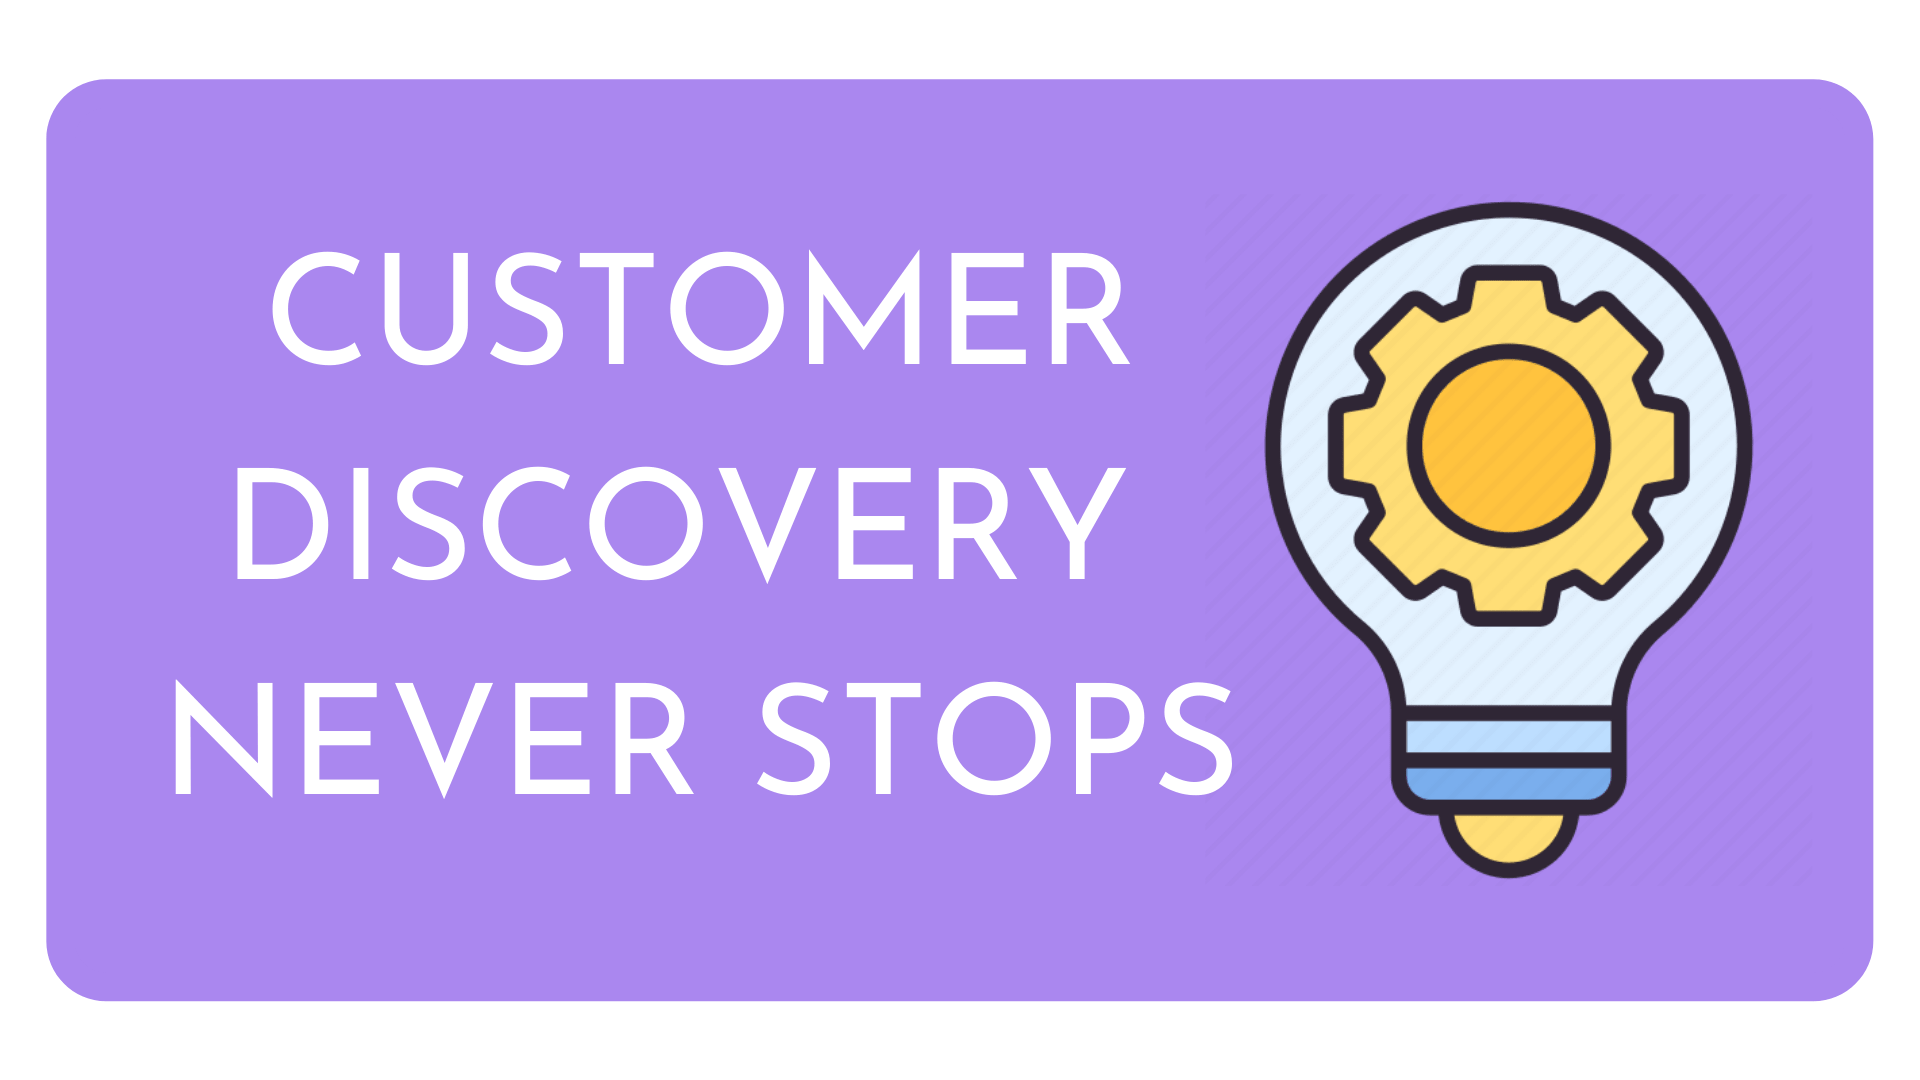 HOW TO USE THE CUSTOMER DISCOVERY PROCESS [COMPLETE GUIDE]